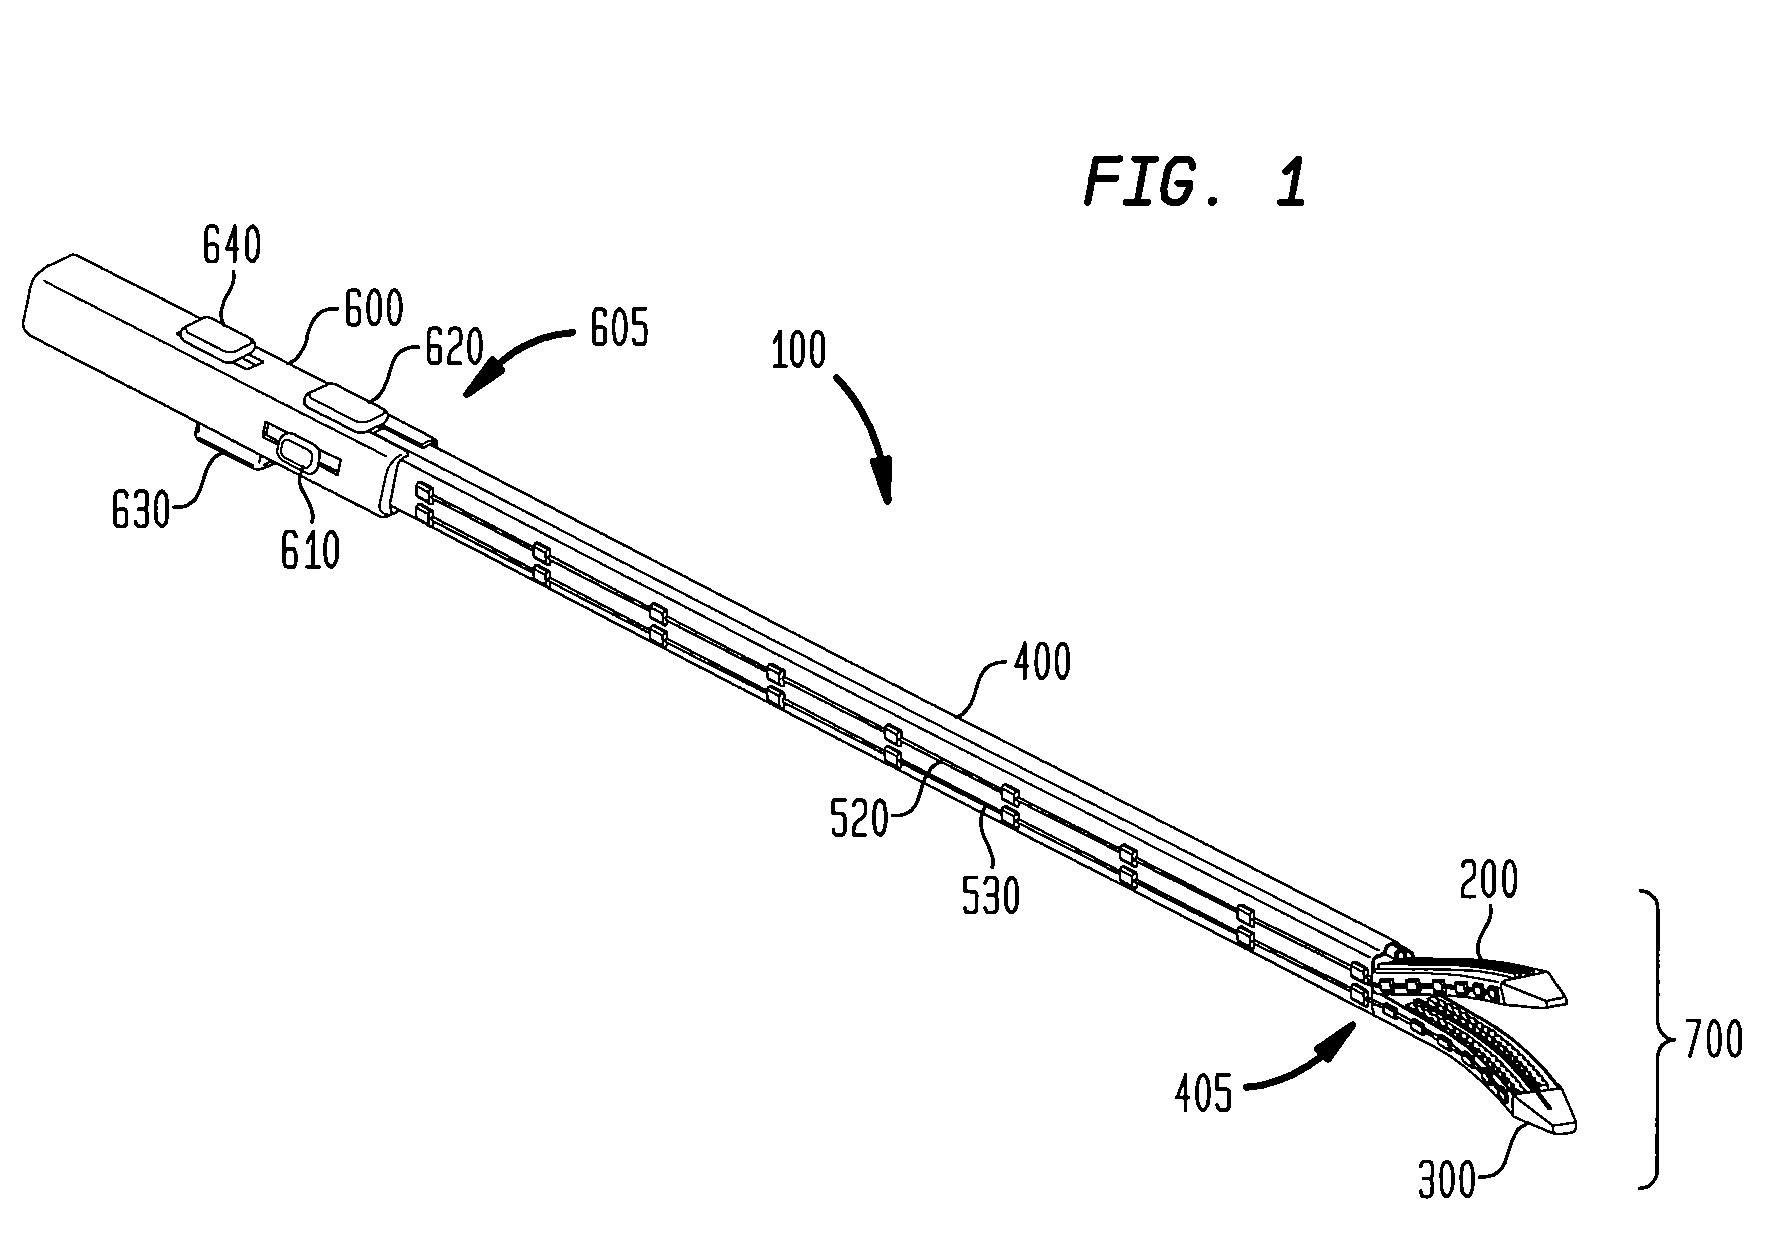 Surgical stapler with a bendable end effector